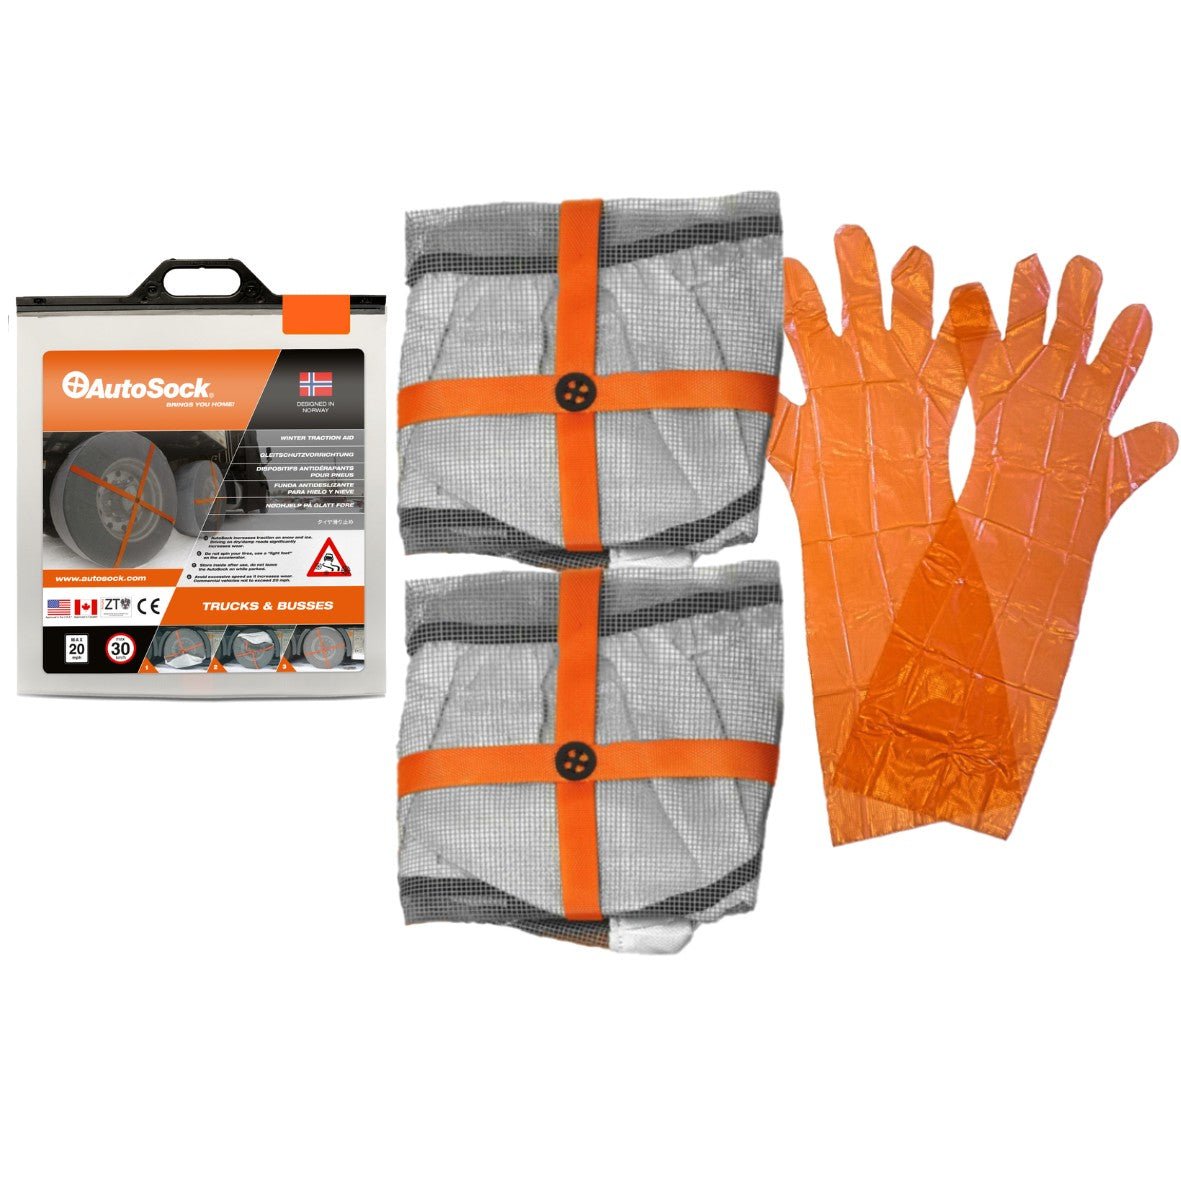 Product packaging content for AutoSock for truck products contains two AutoSock and a pair of gloves